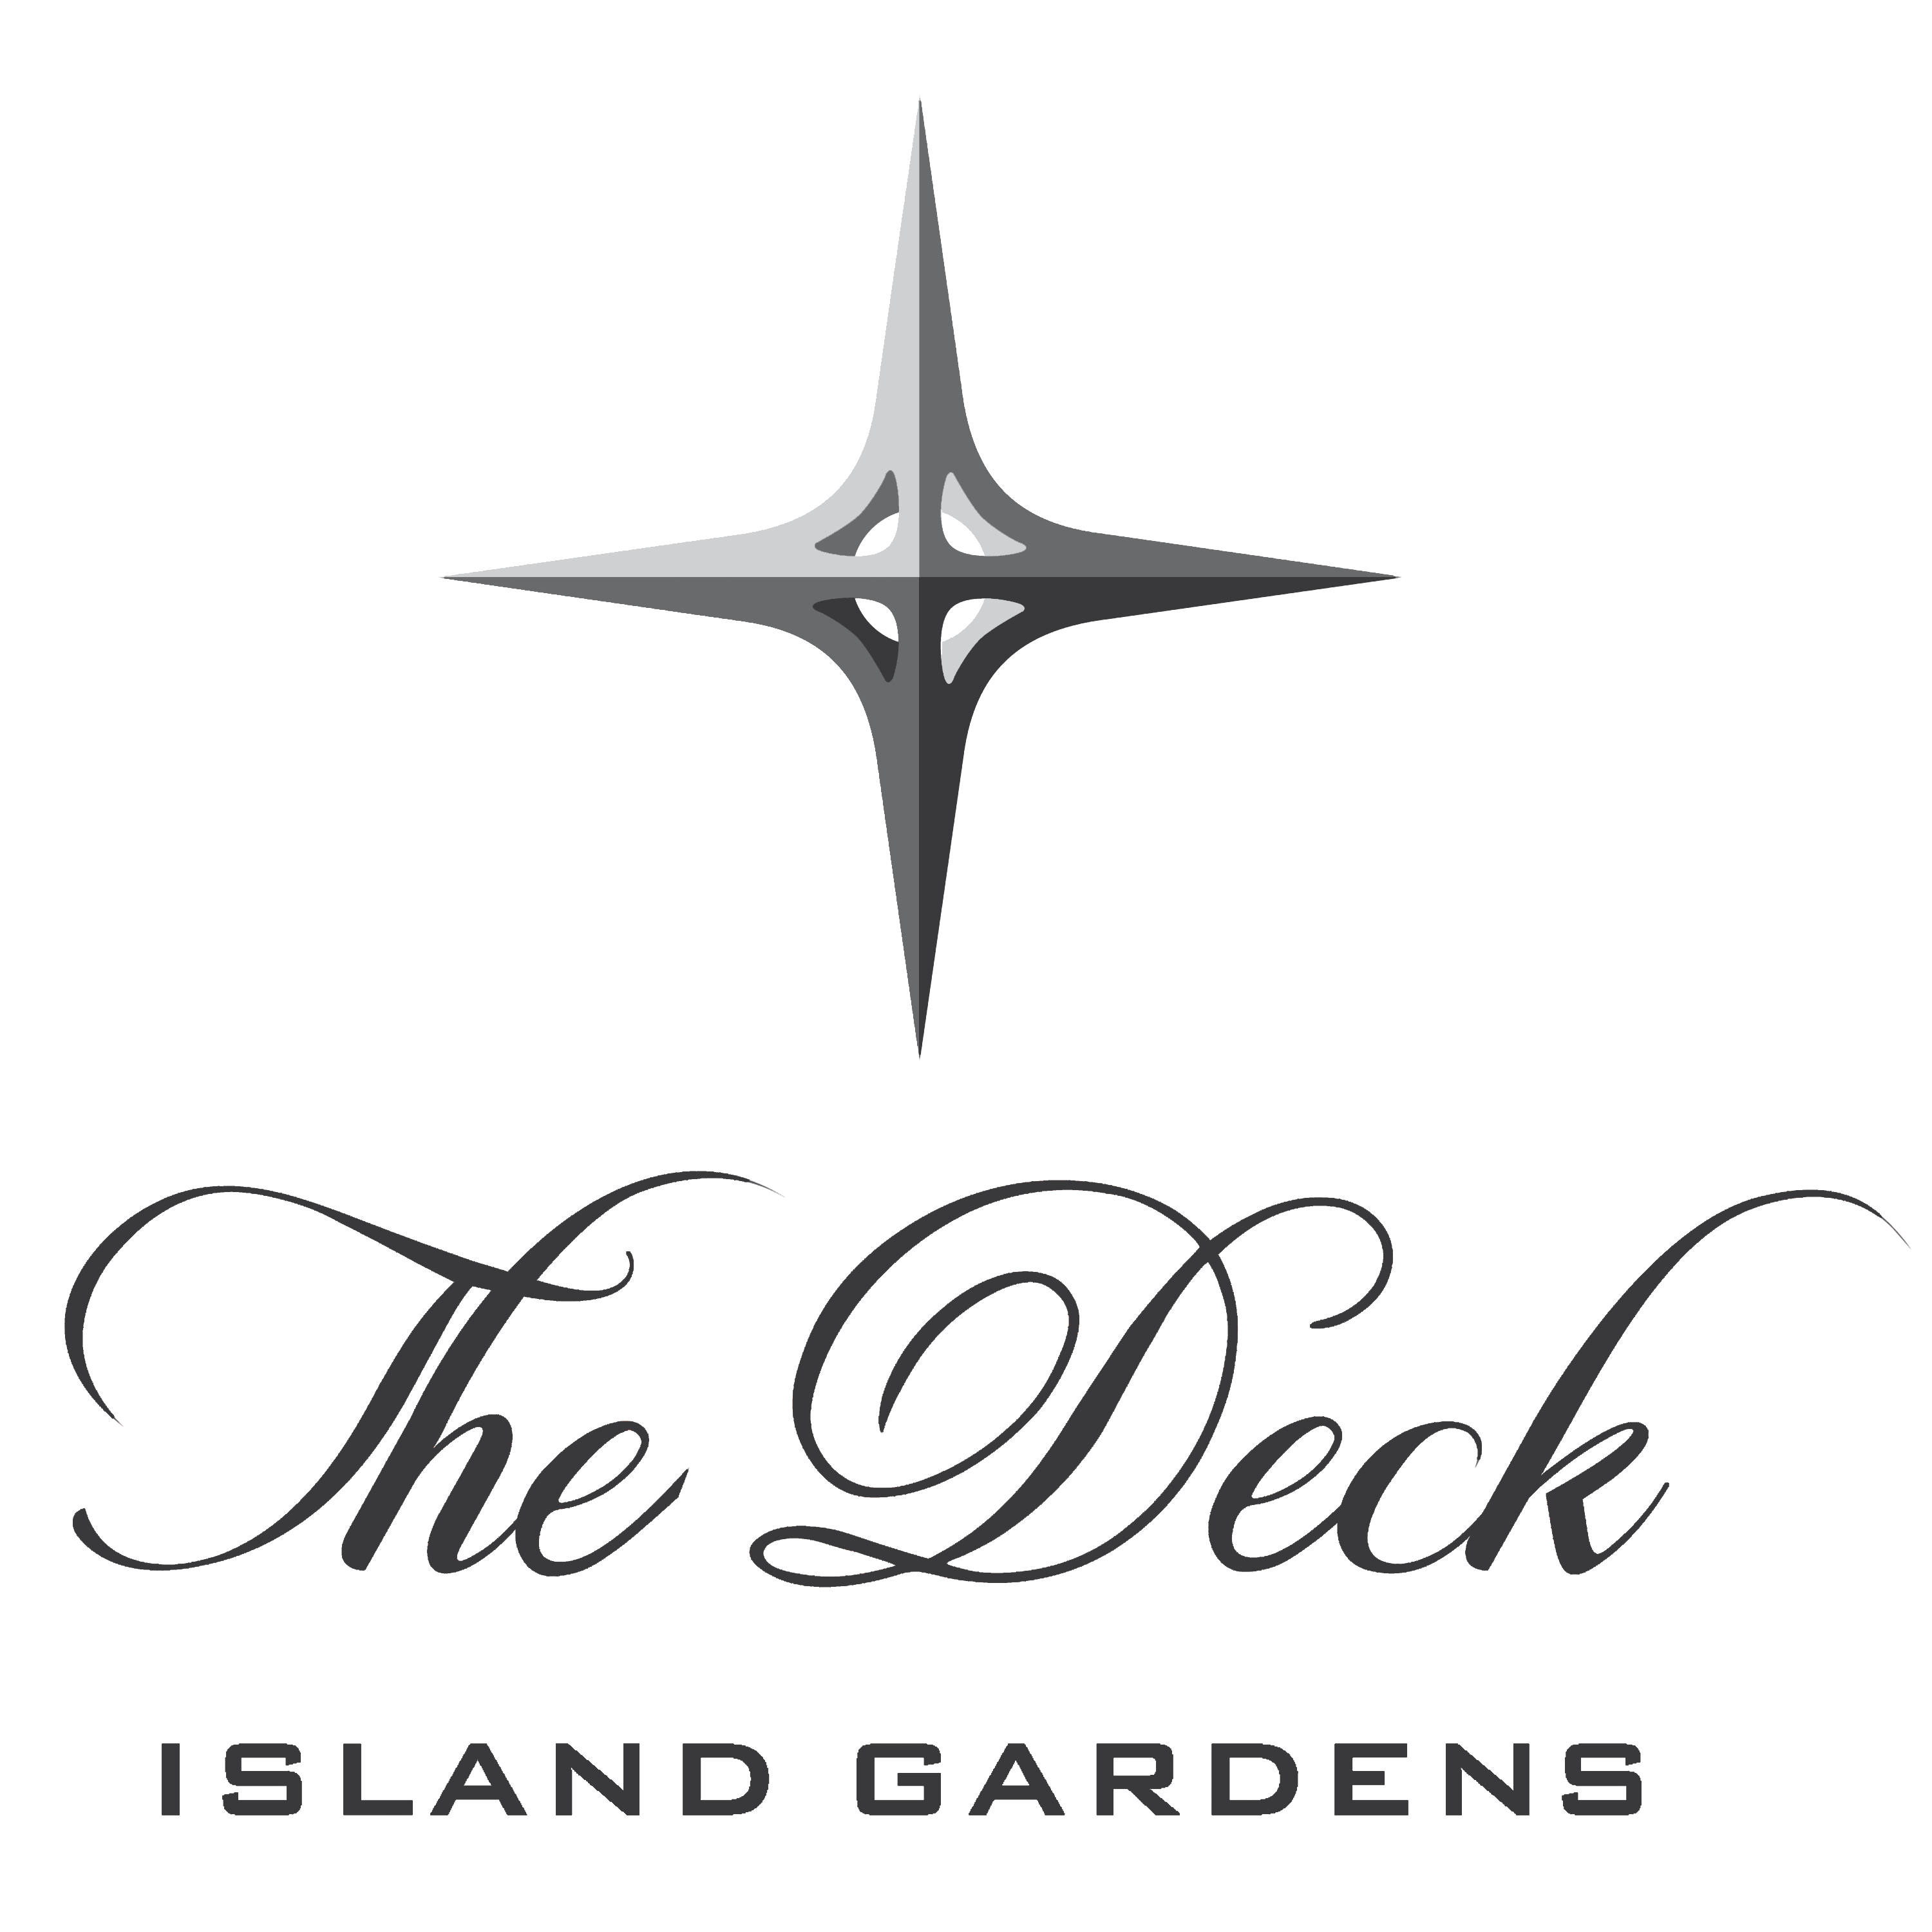 The Deck at Island Gardens Photo